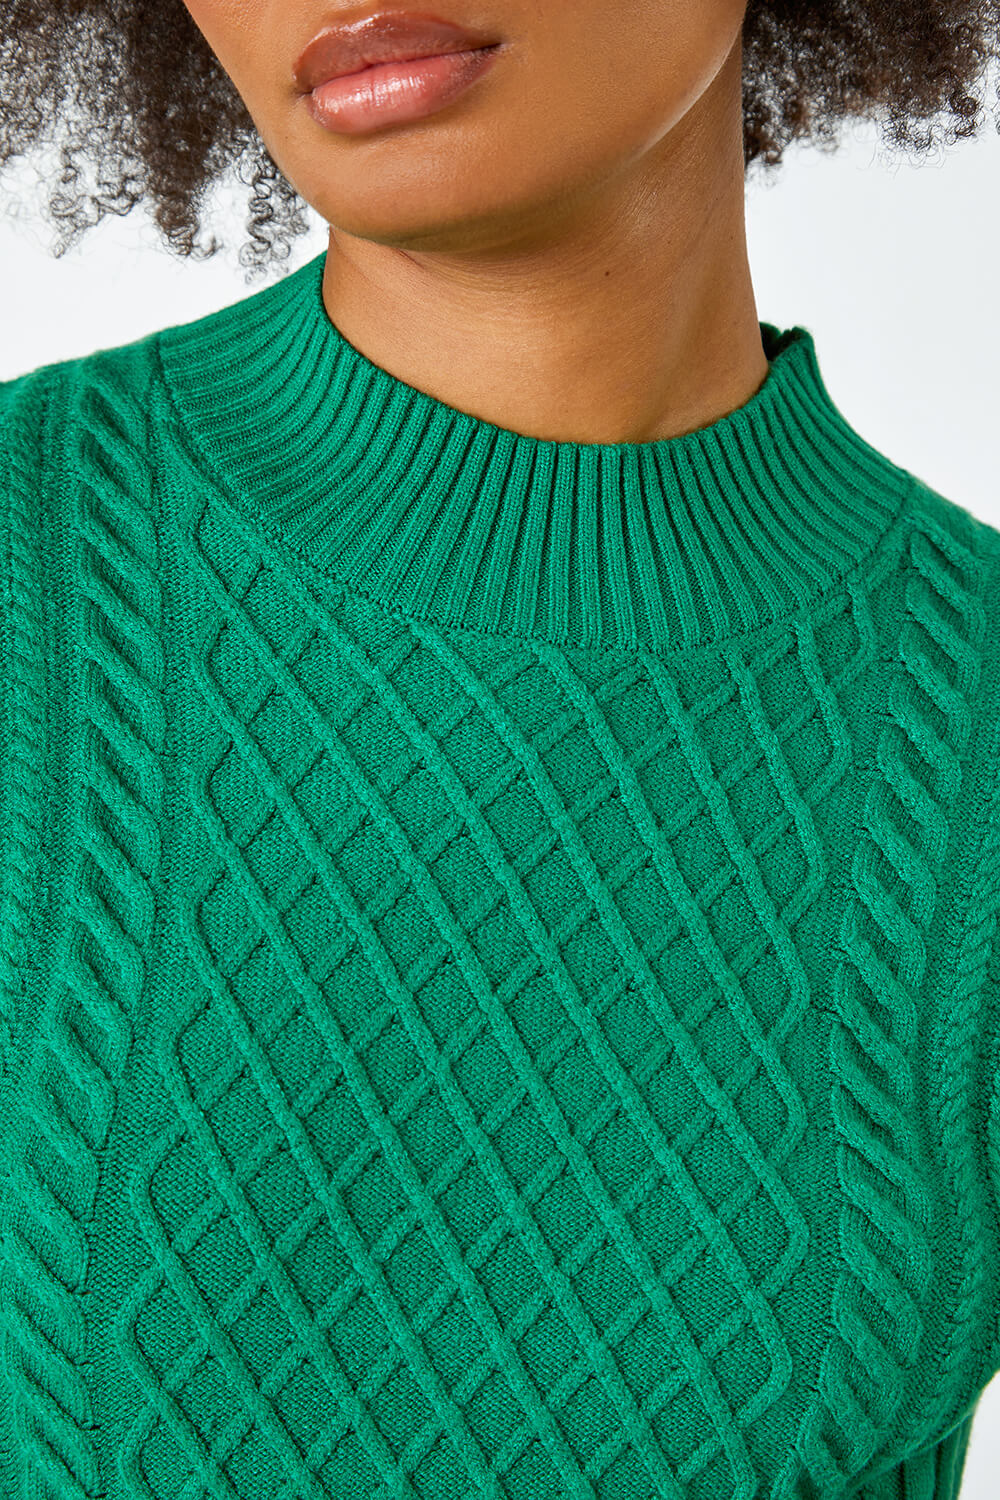 Green Cable Knit Midi Jumper Dress, Image 5 of 7